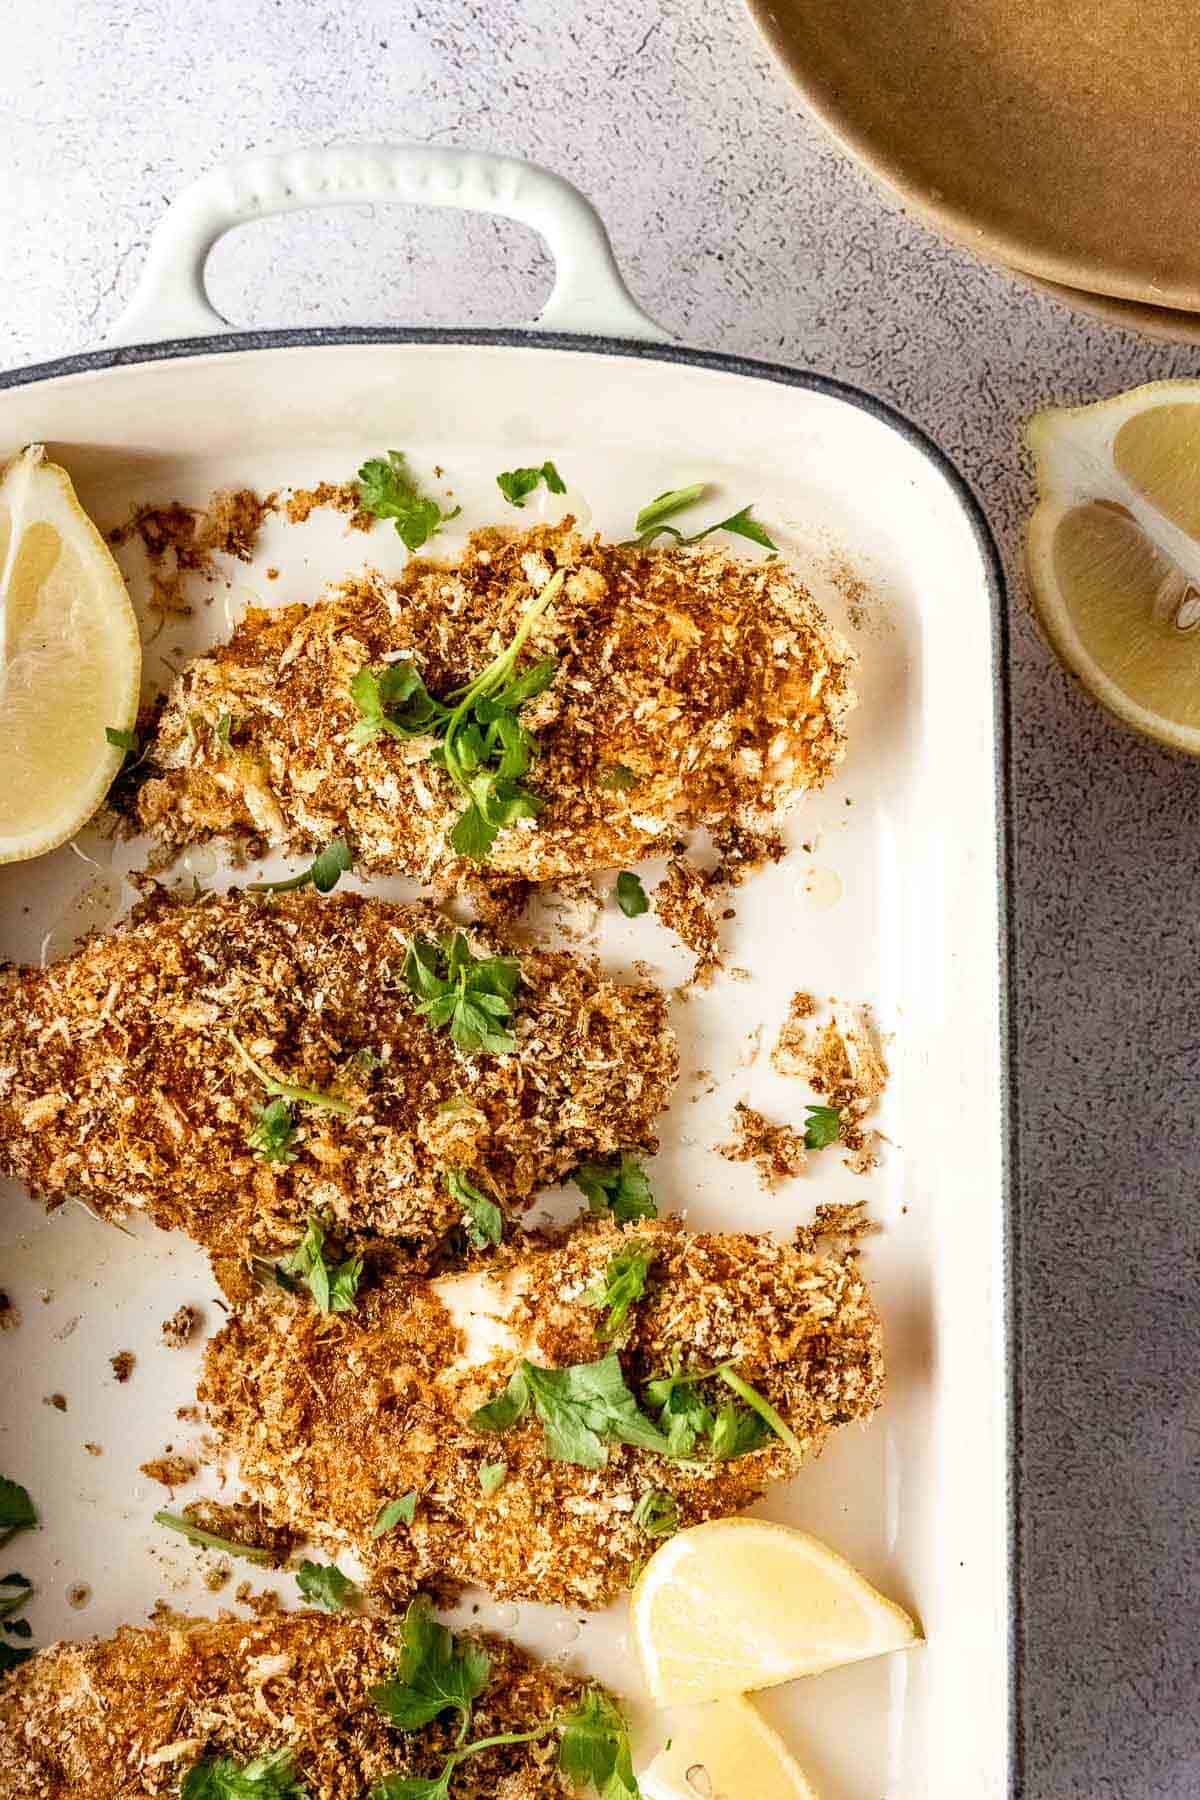 Baked panko crusted chicken breasts in a baking dish with lemon wedges.